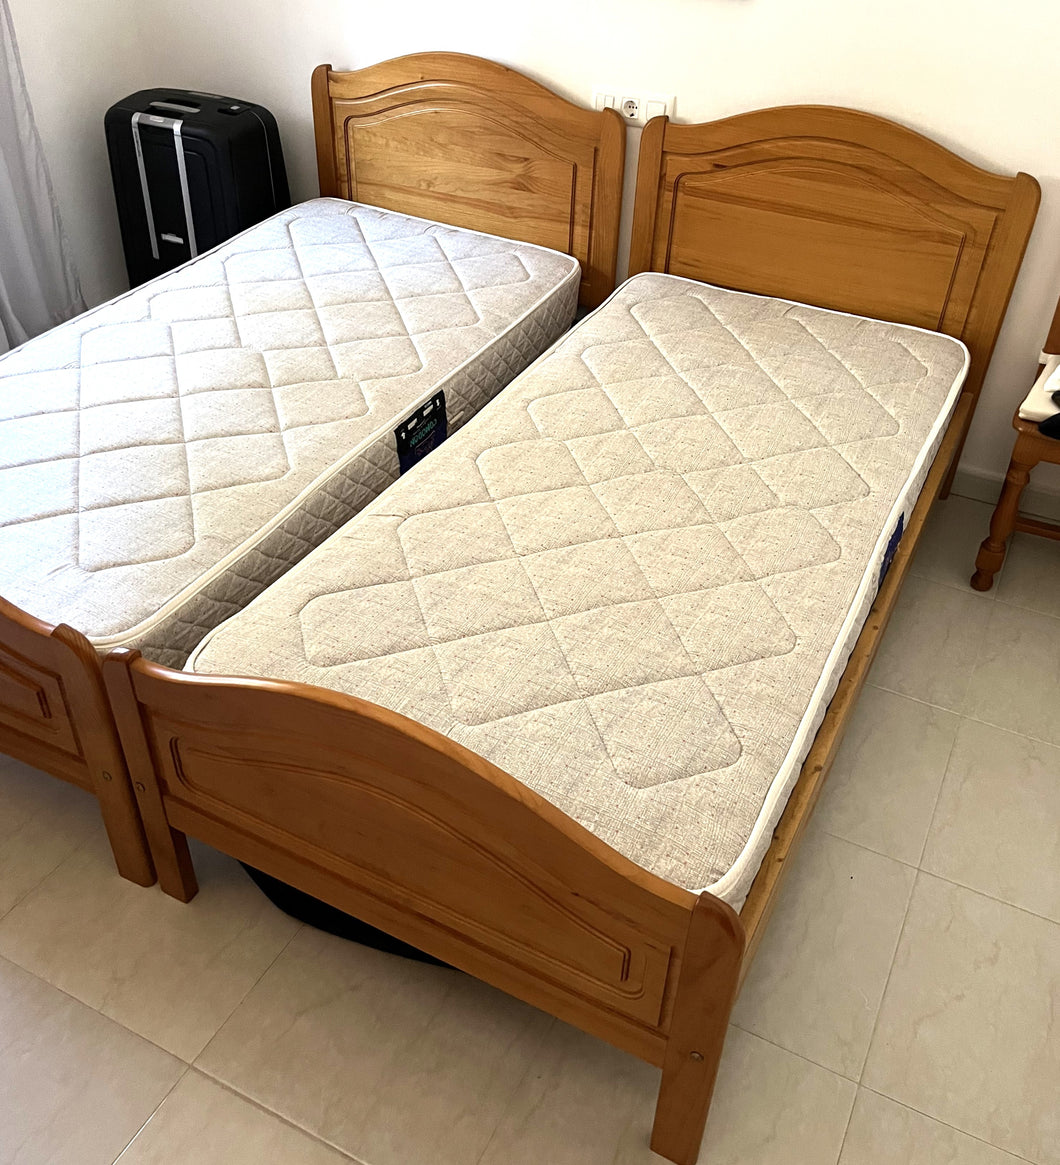 1113 - Two pine beds with mattresses (nice and clean) 295€ for both complete beds